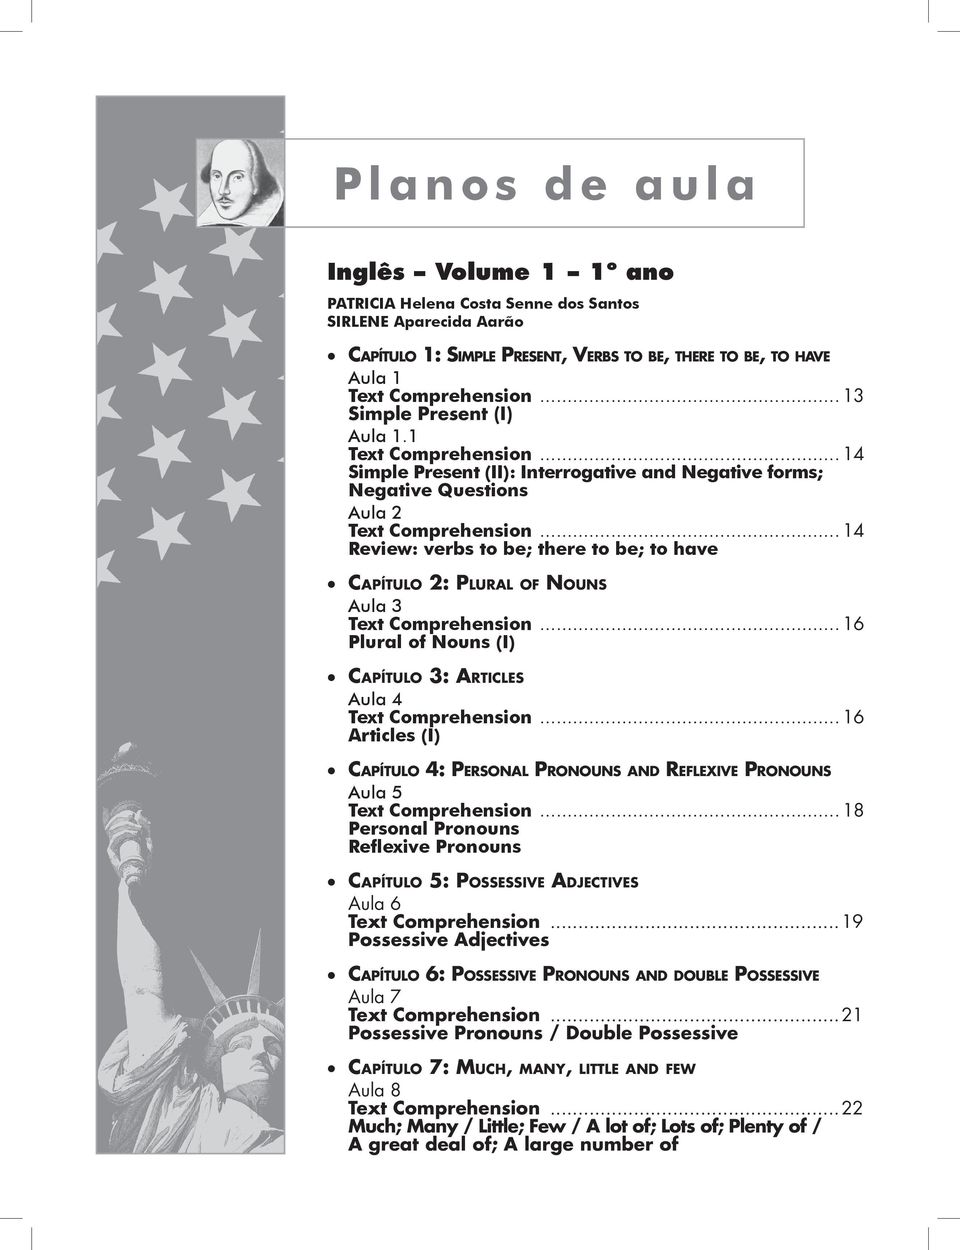 ..14 Review: verbs to be; there to be; to have CAPÍTULO 2: PLURAL OF NOUNS Aula 3 Text Comprehension...16 Plural of Nouns (I) CAPÍTULO 3: ARTICLES Aula 4 Text Comprehension.